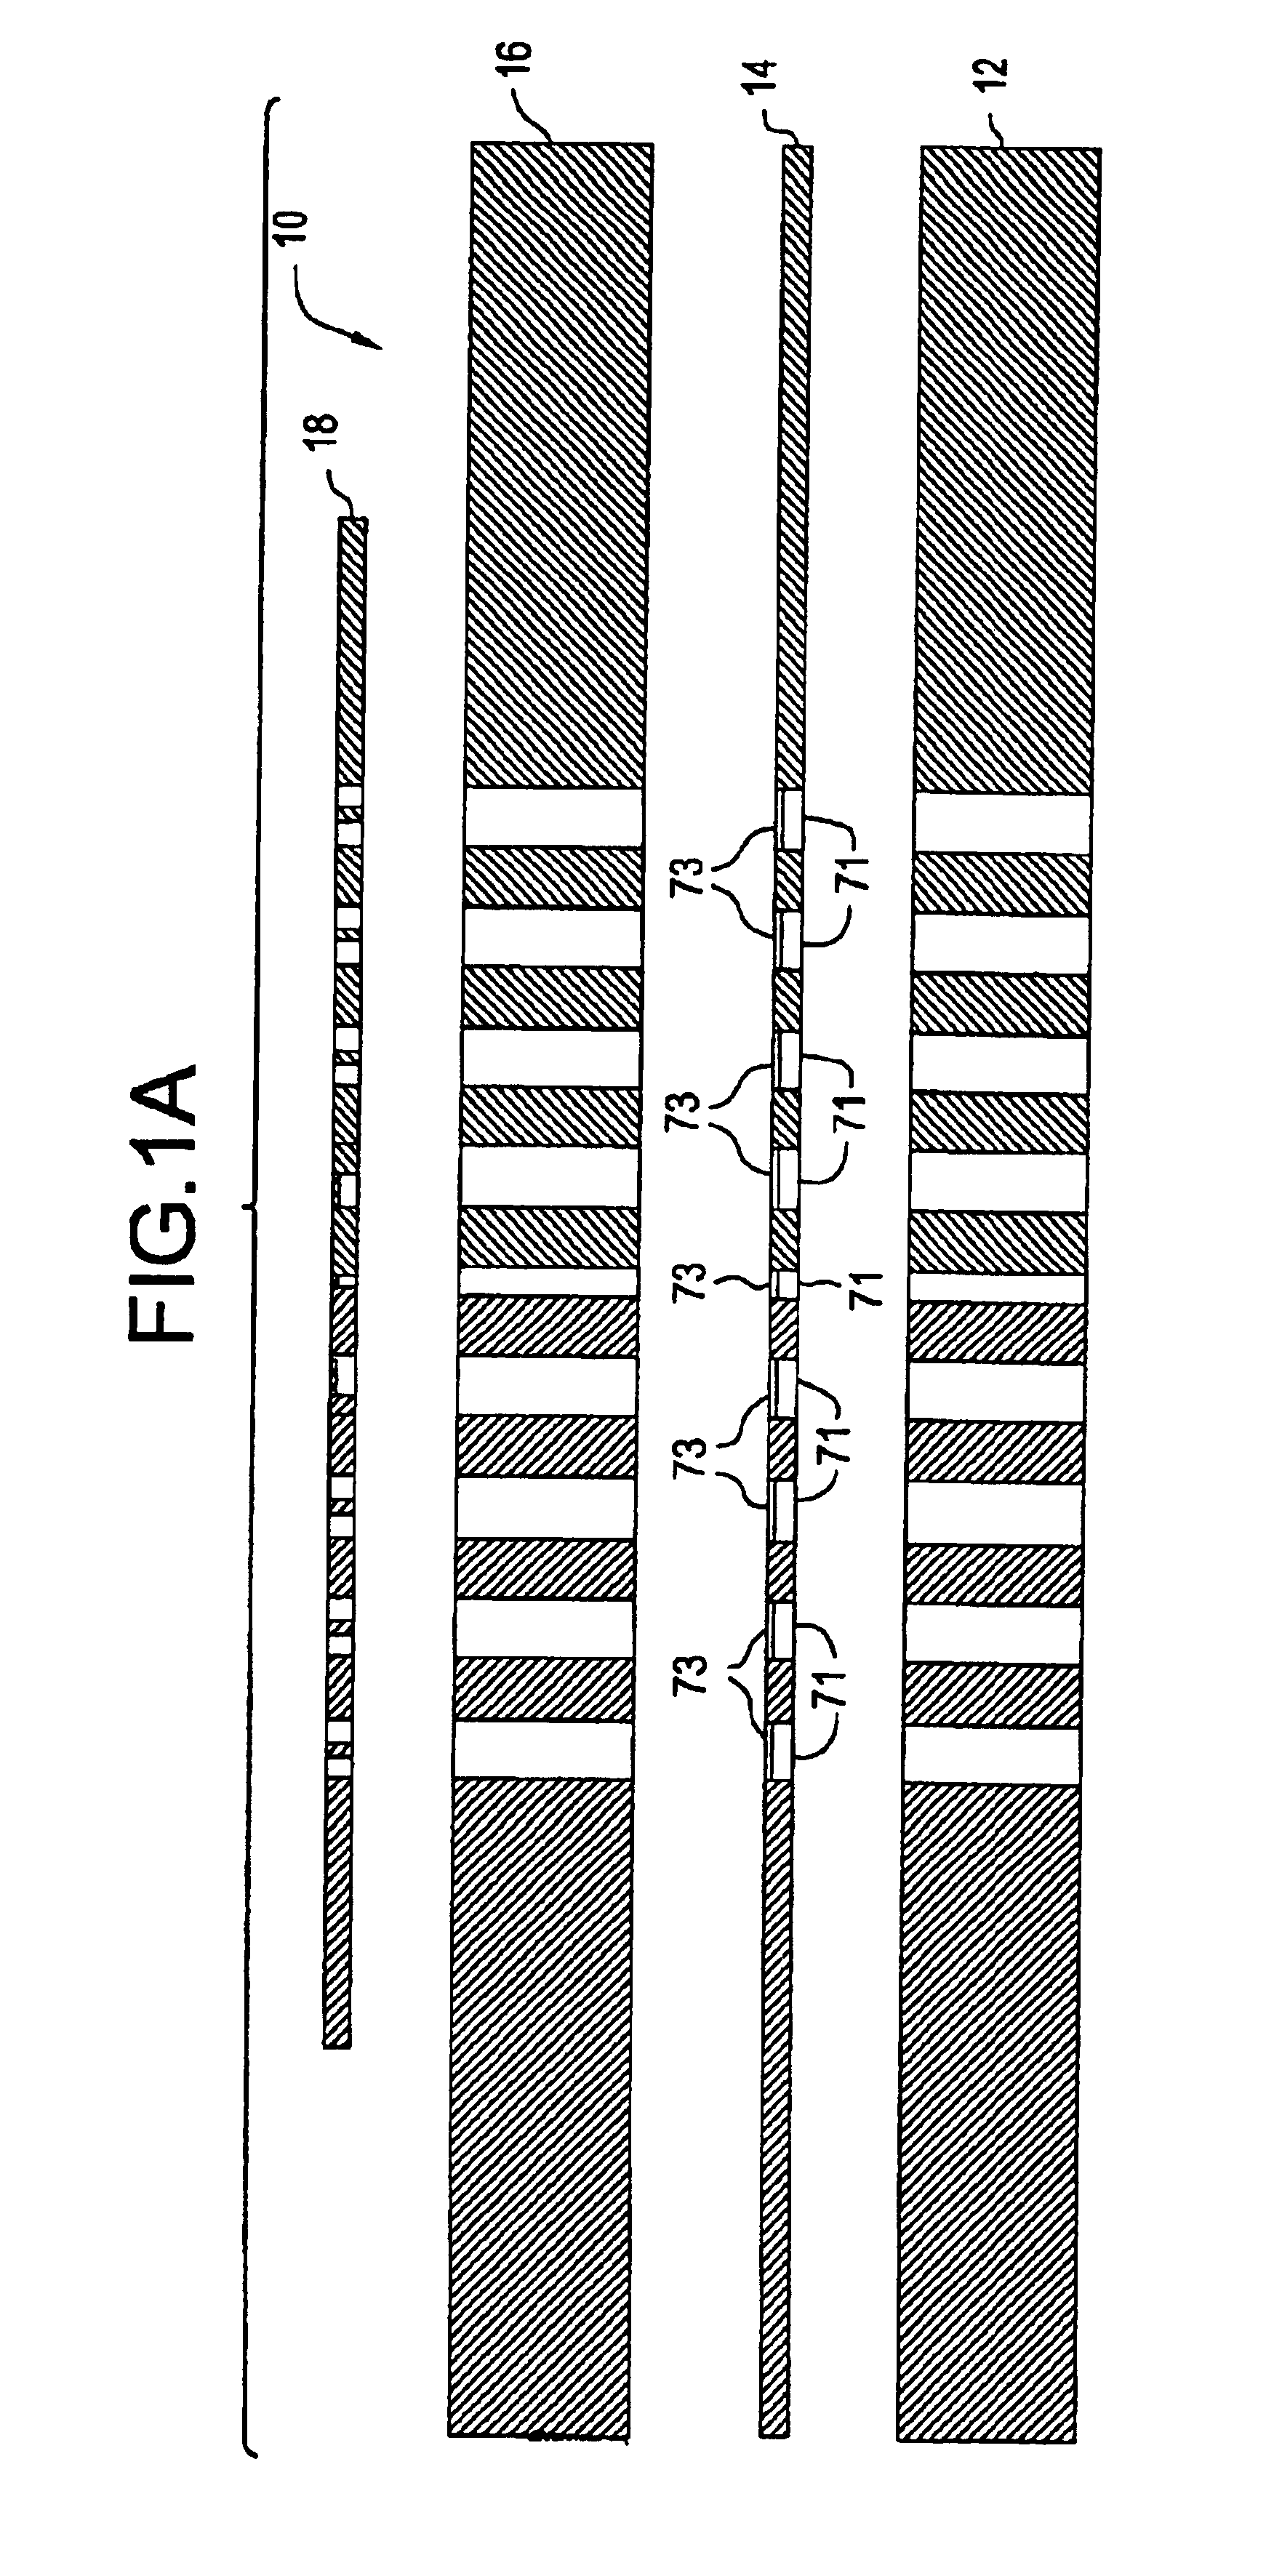 Method of producing oxide soot using a burner with a planar burner face